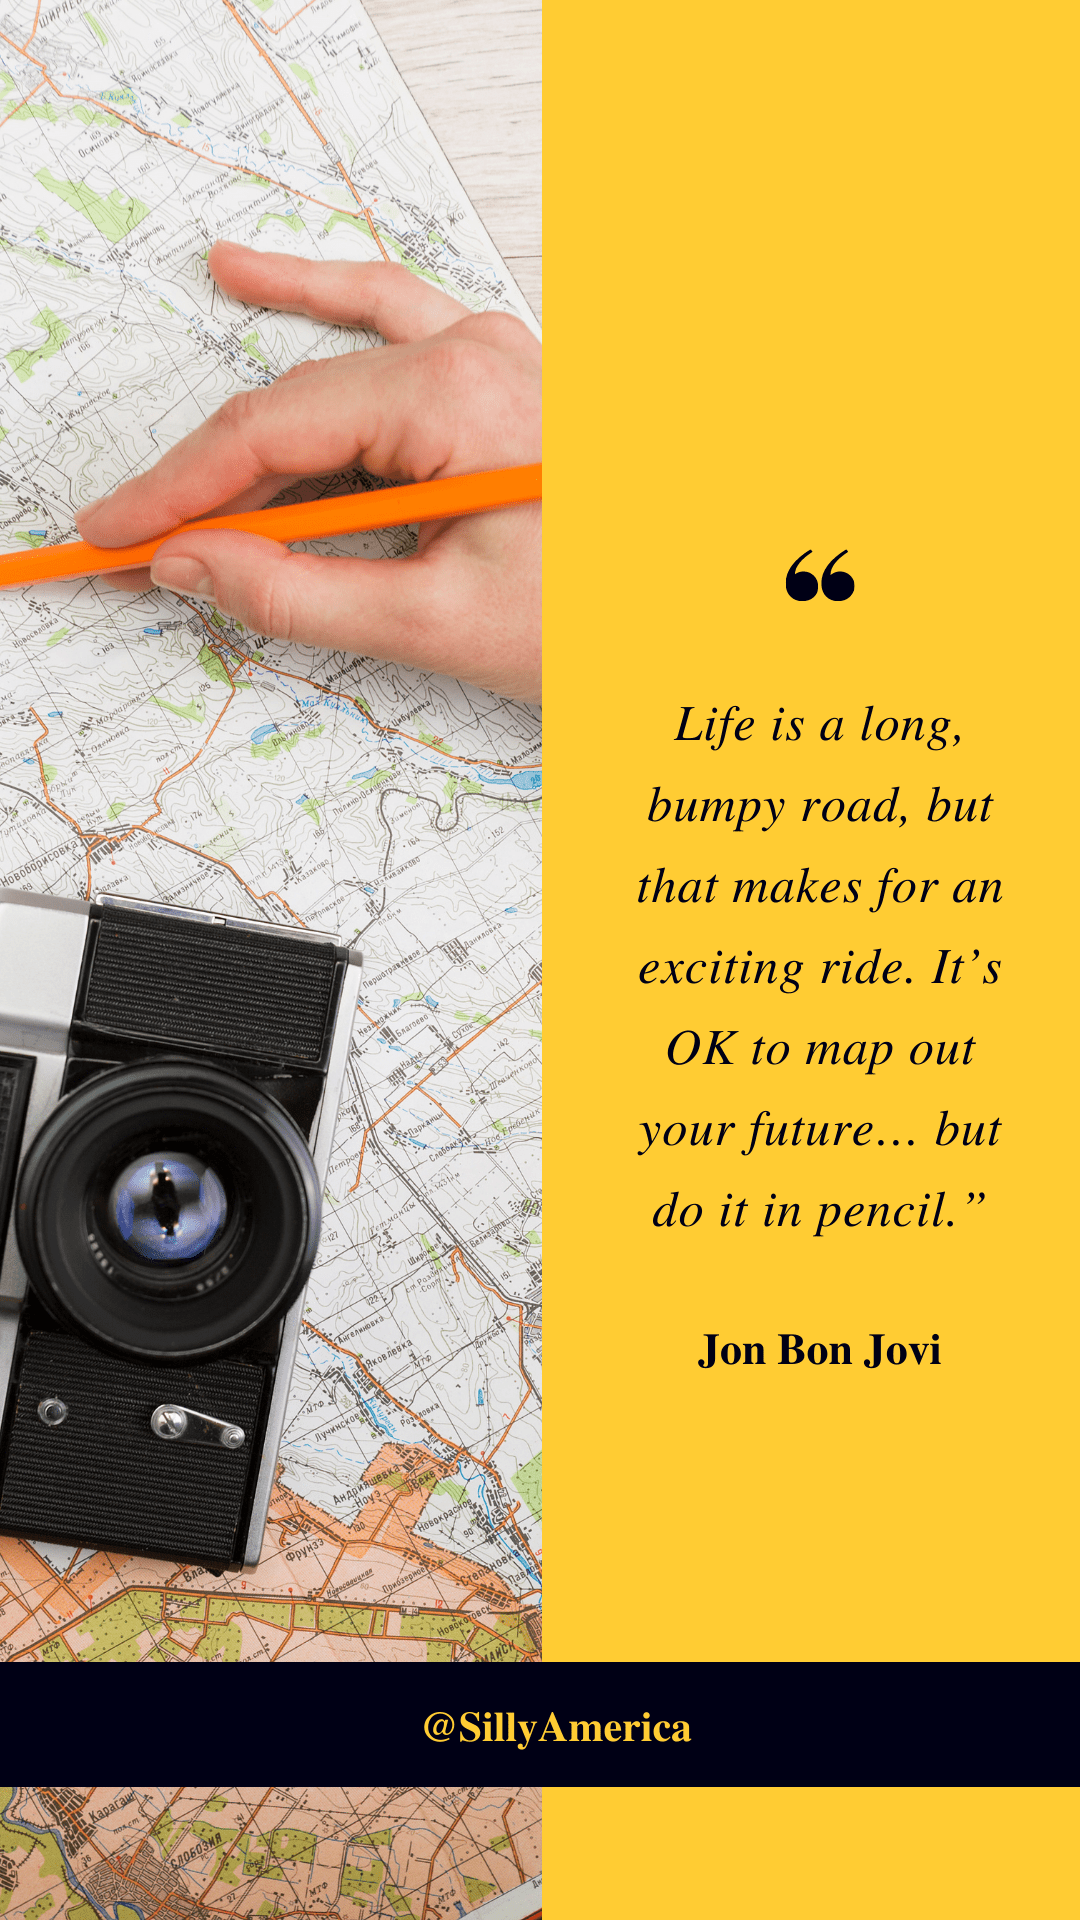 “Life is a long, bumpy road, but that makes for an exciting ride. It’s OK to map out your future… but do it in pencil.” Jon Bon Jovi